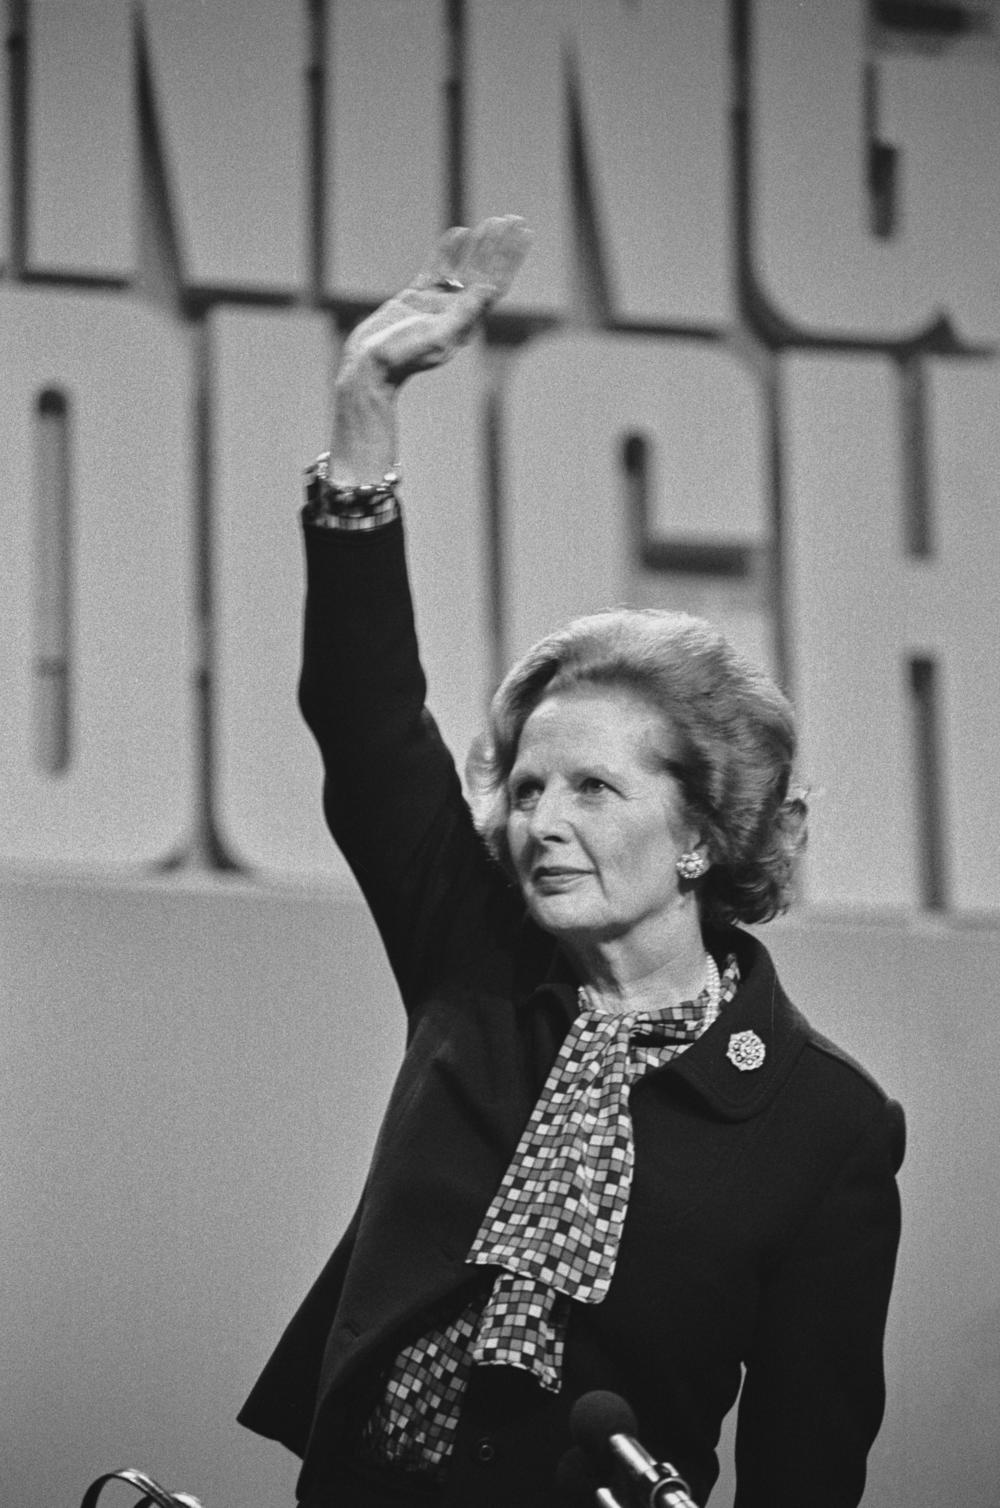 British Prime Minister Margaret Thatcher waves from the podium at the Conservative Party Conference in Brighton in October 1984.